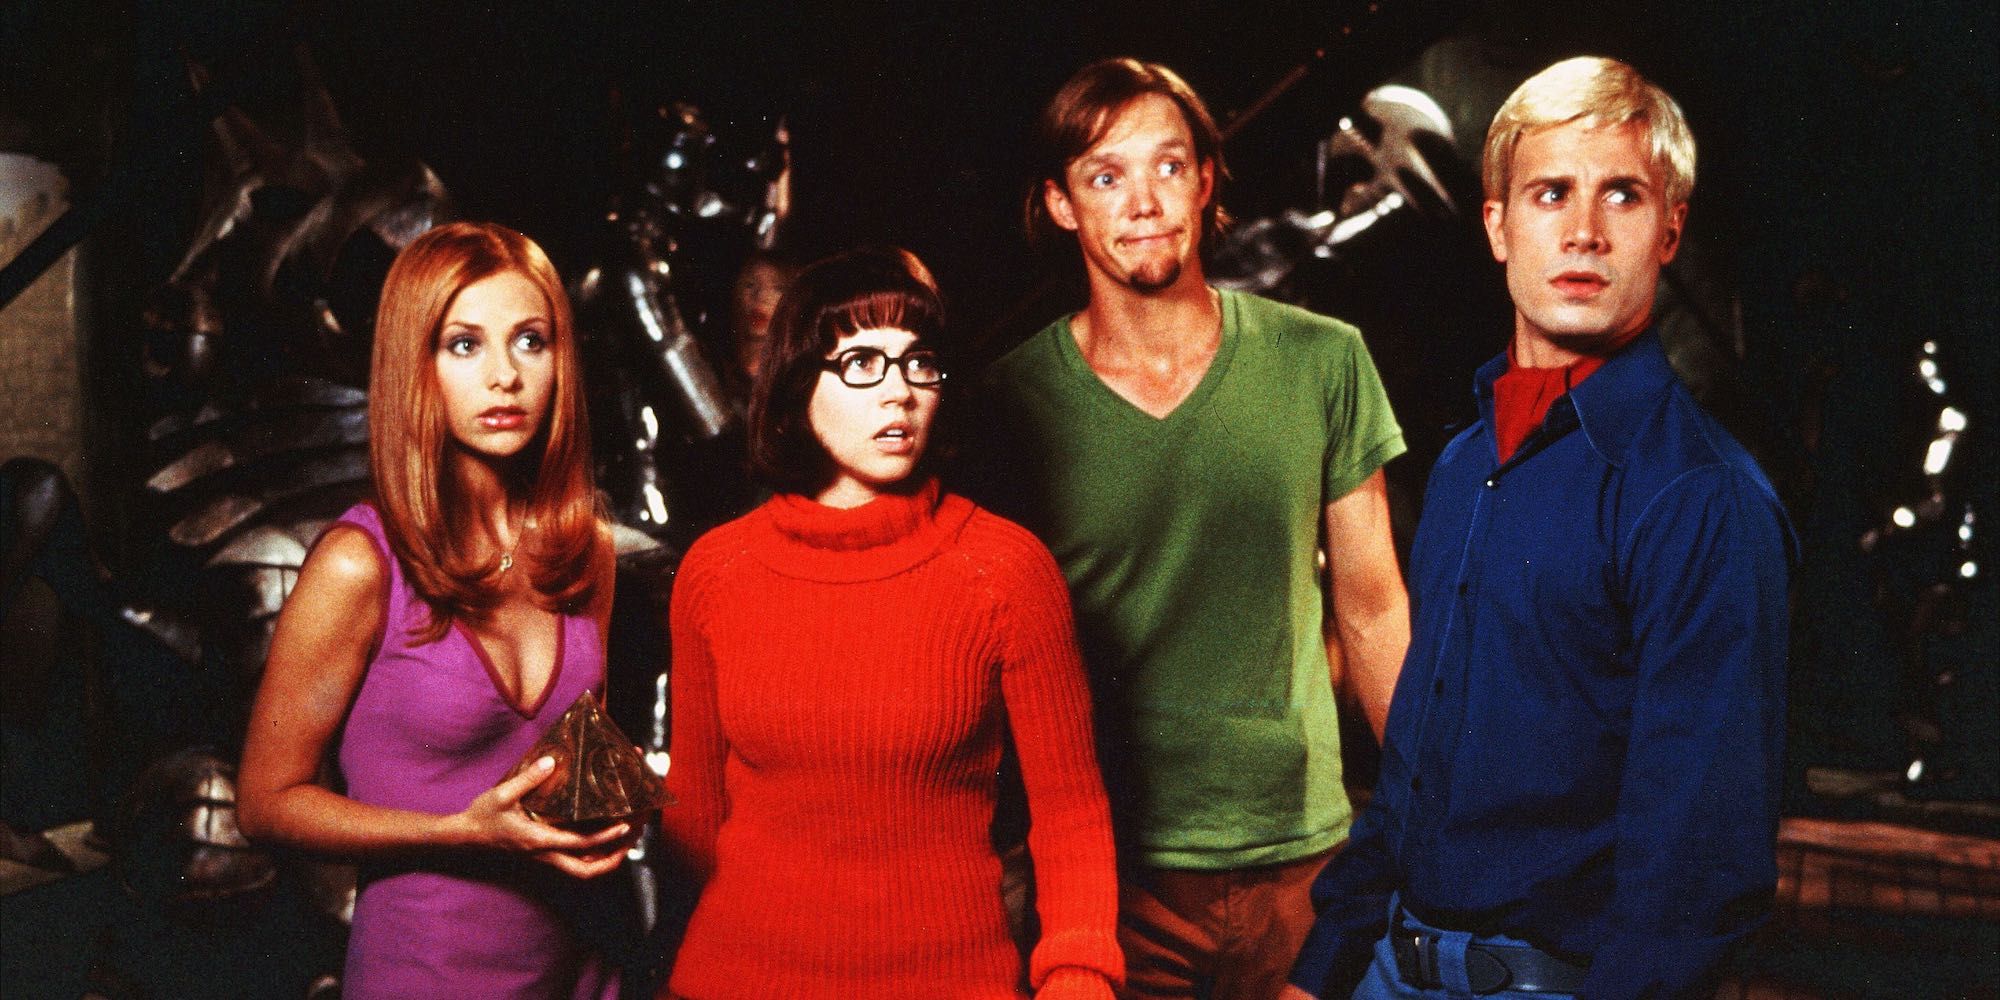 Velma Was Gay In Scooby-Doo Movie, But WB Made James Gunn Change It